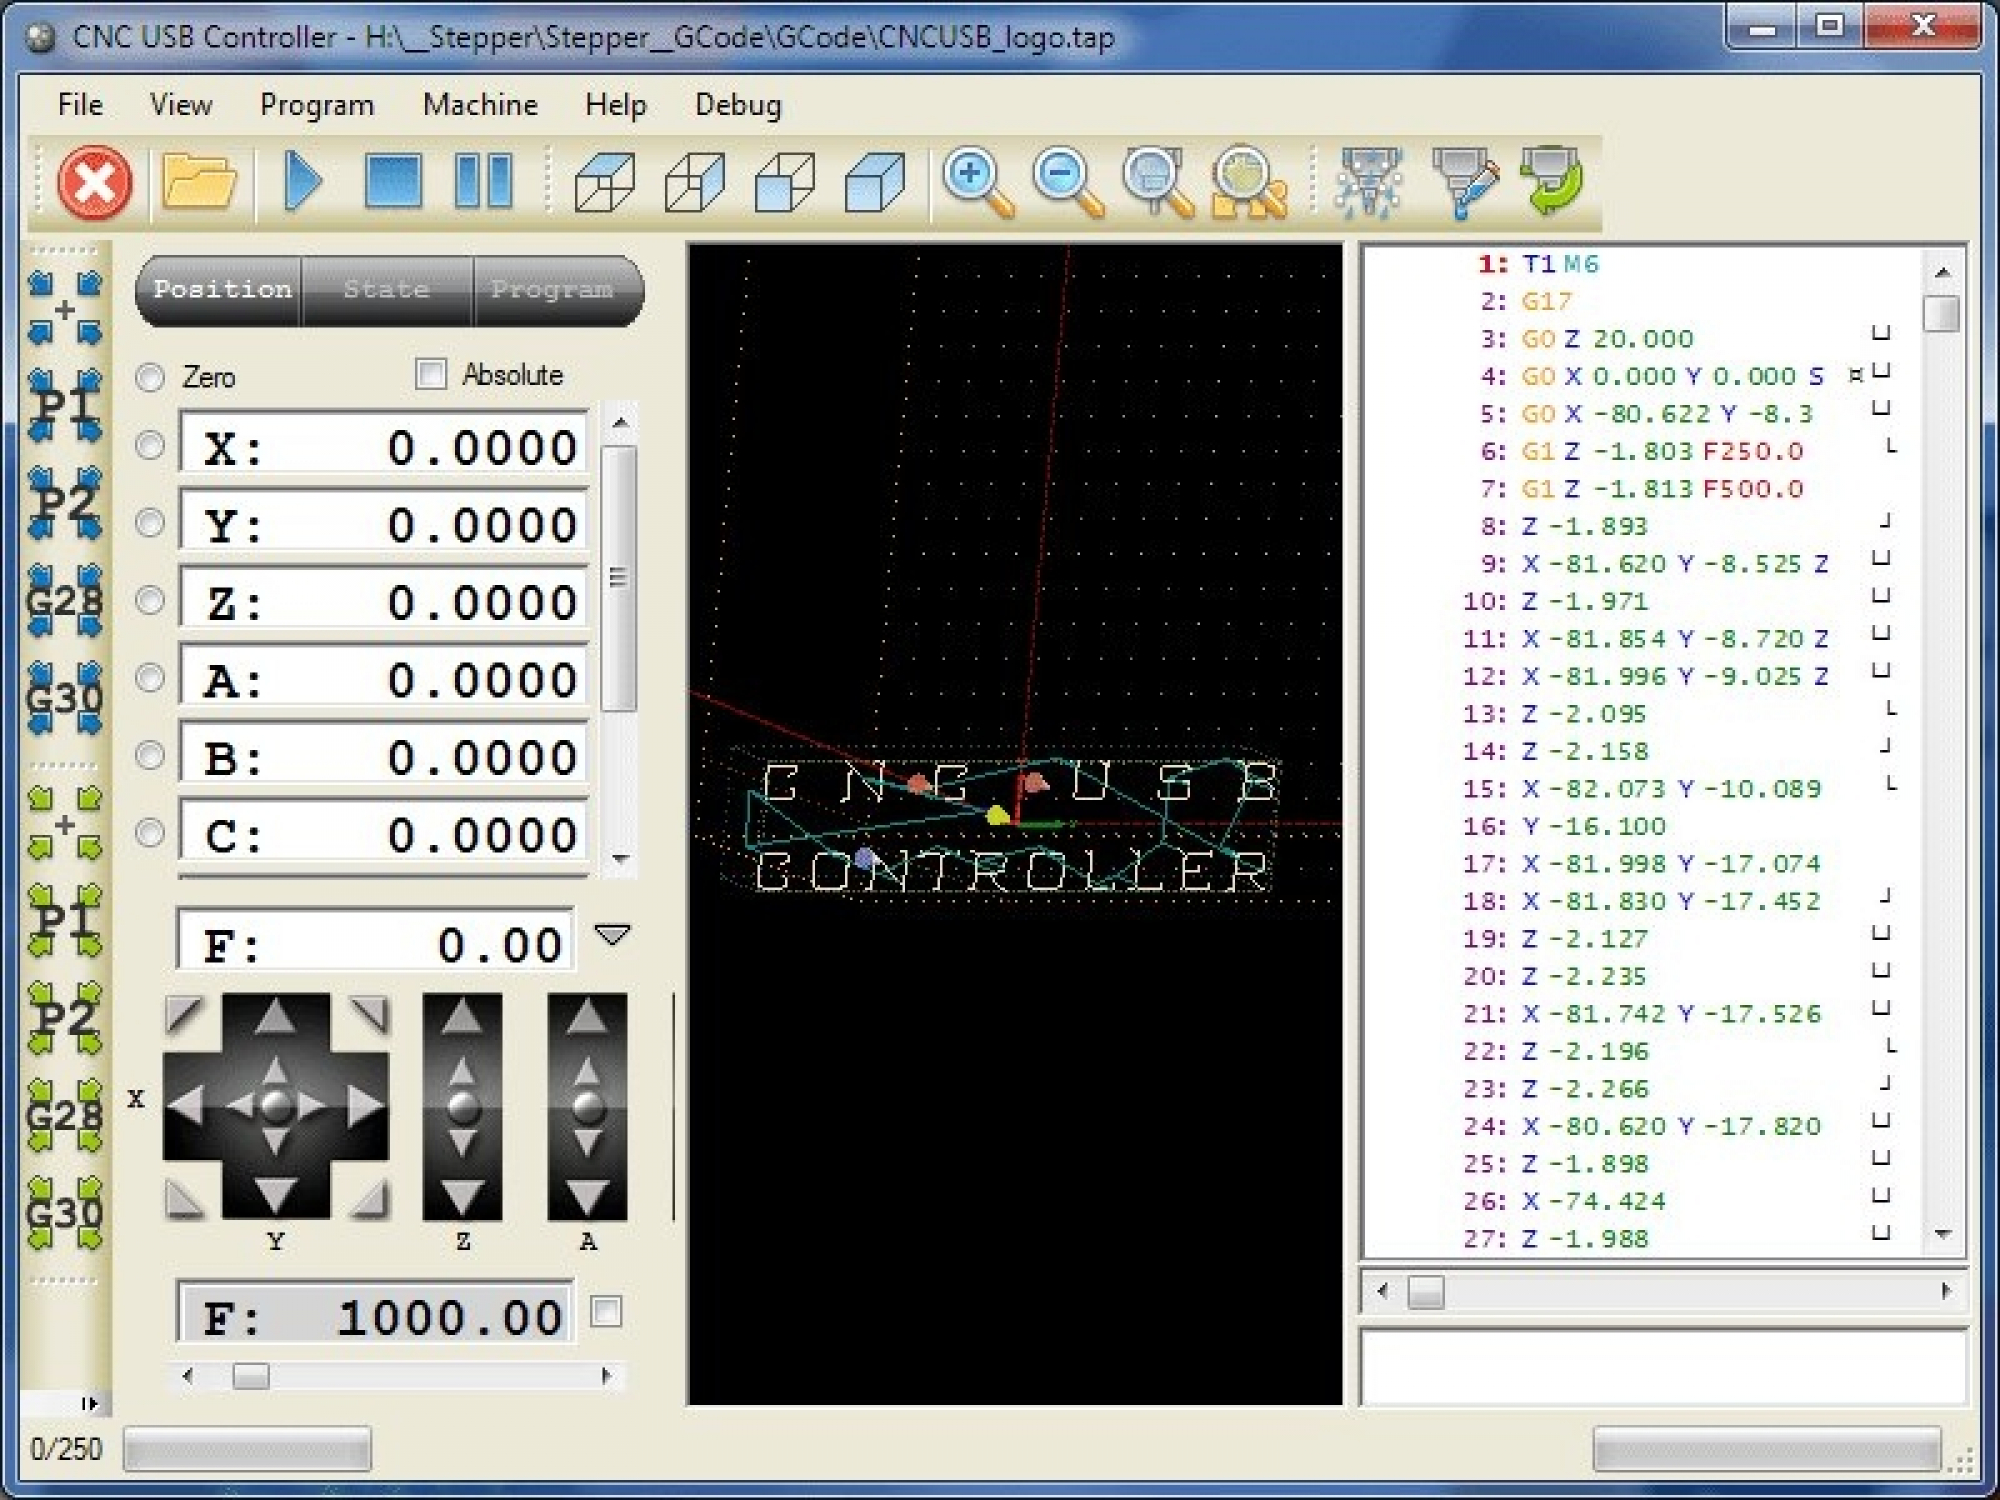 cnc usb controller software in english